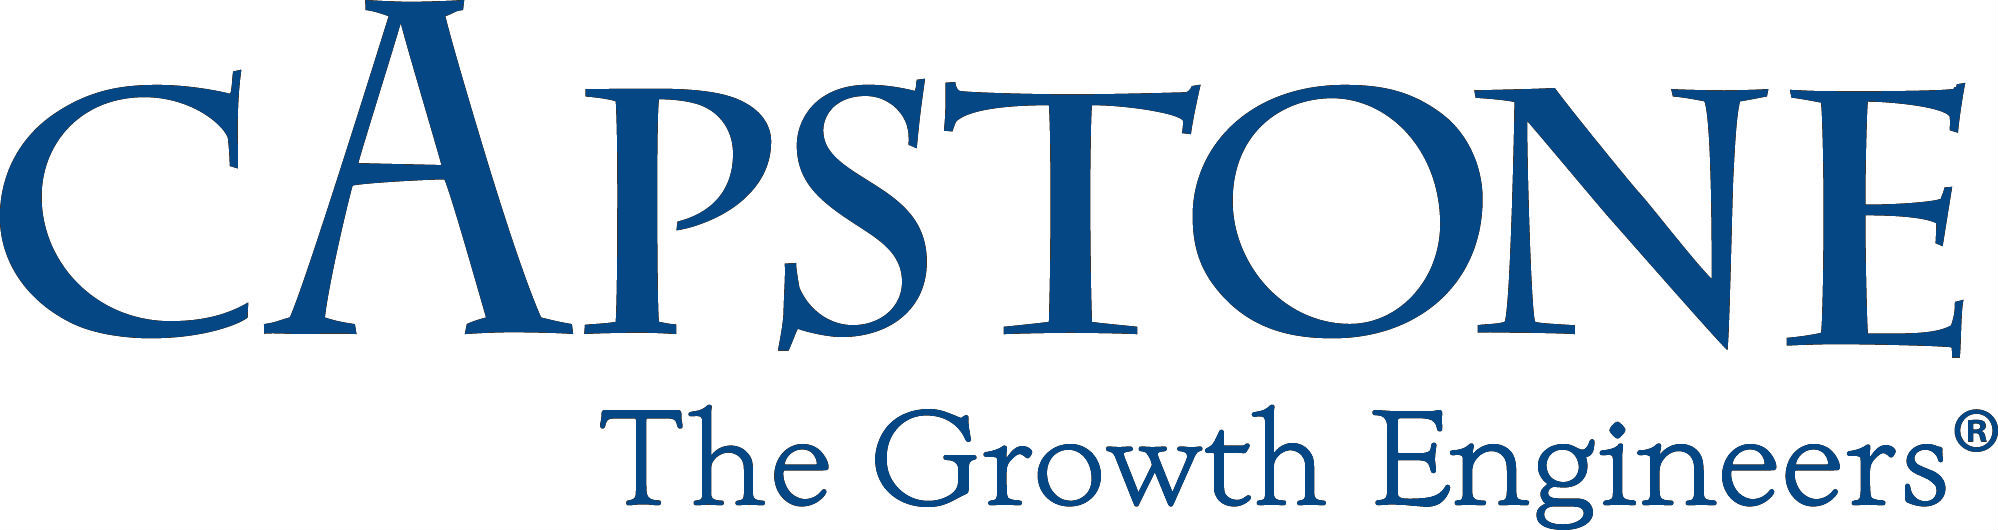 Capstone is a strategic consulting firm located outside of Washington, D.C., specializing in corporate growth strategies, primarily Mergers & Acquisitions for the middle market.